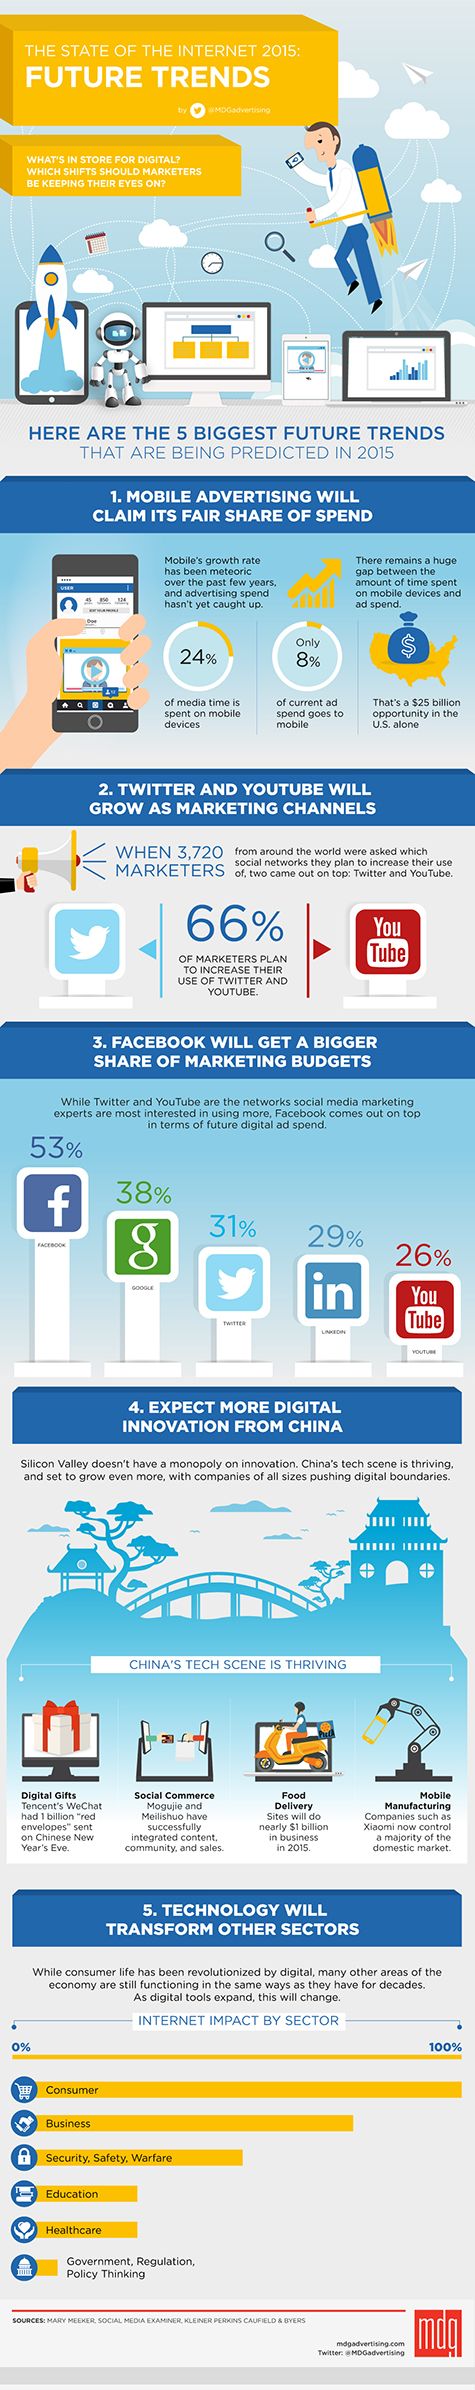 The 5 Biggest Trends Being Predicted at the End of 2015 [INFOGRAPHIC] | Social Media Today